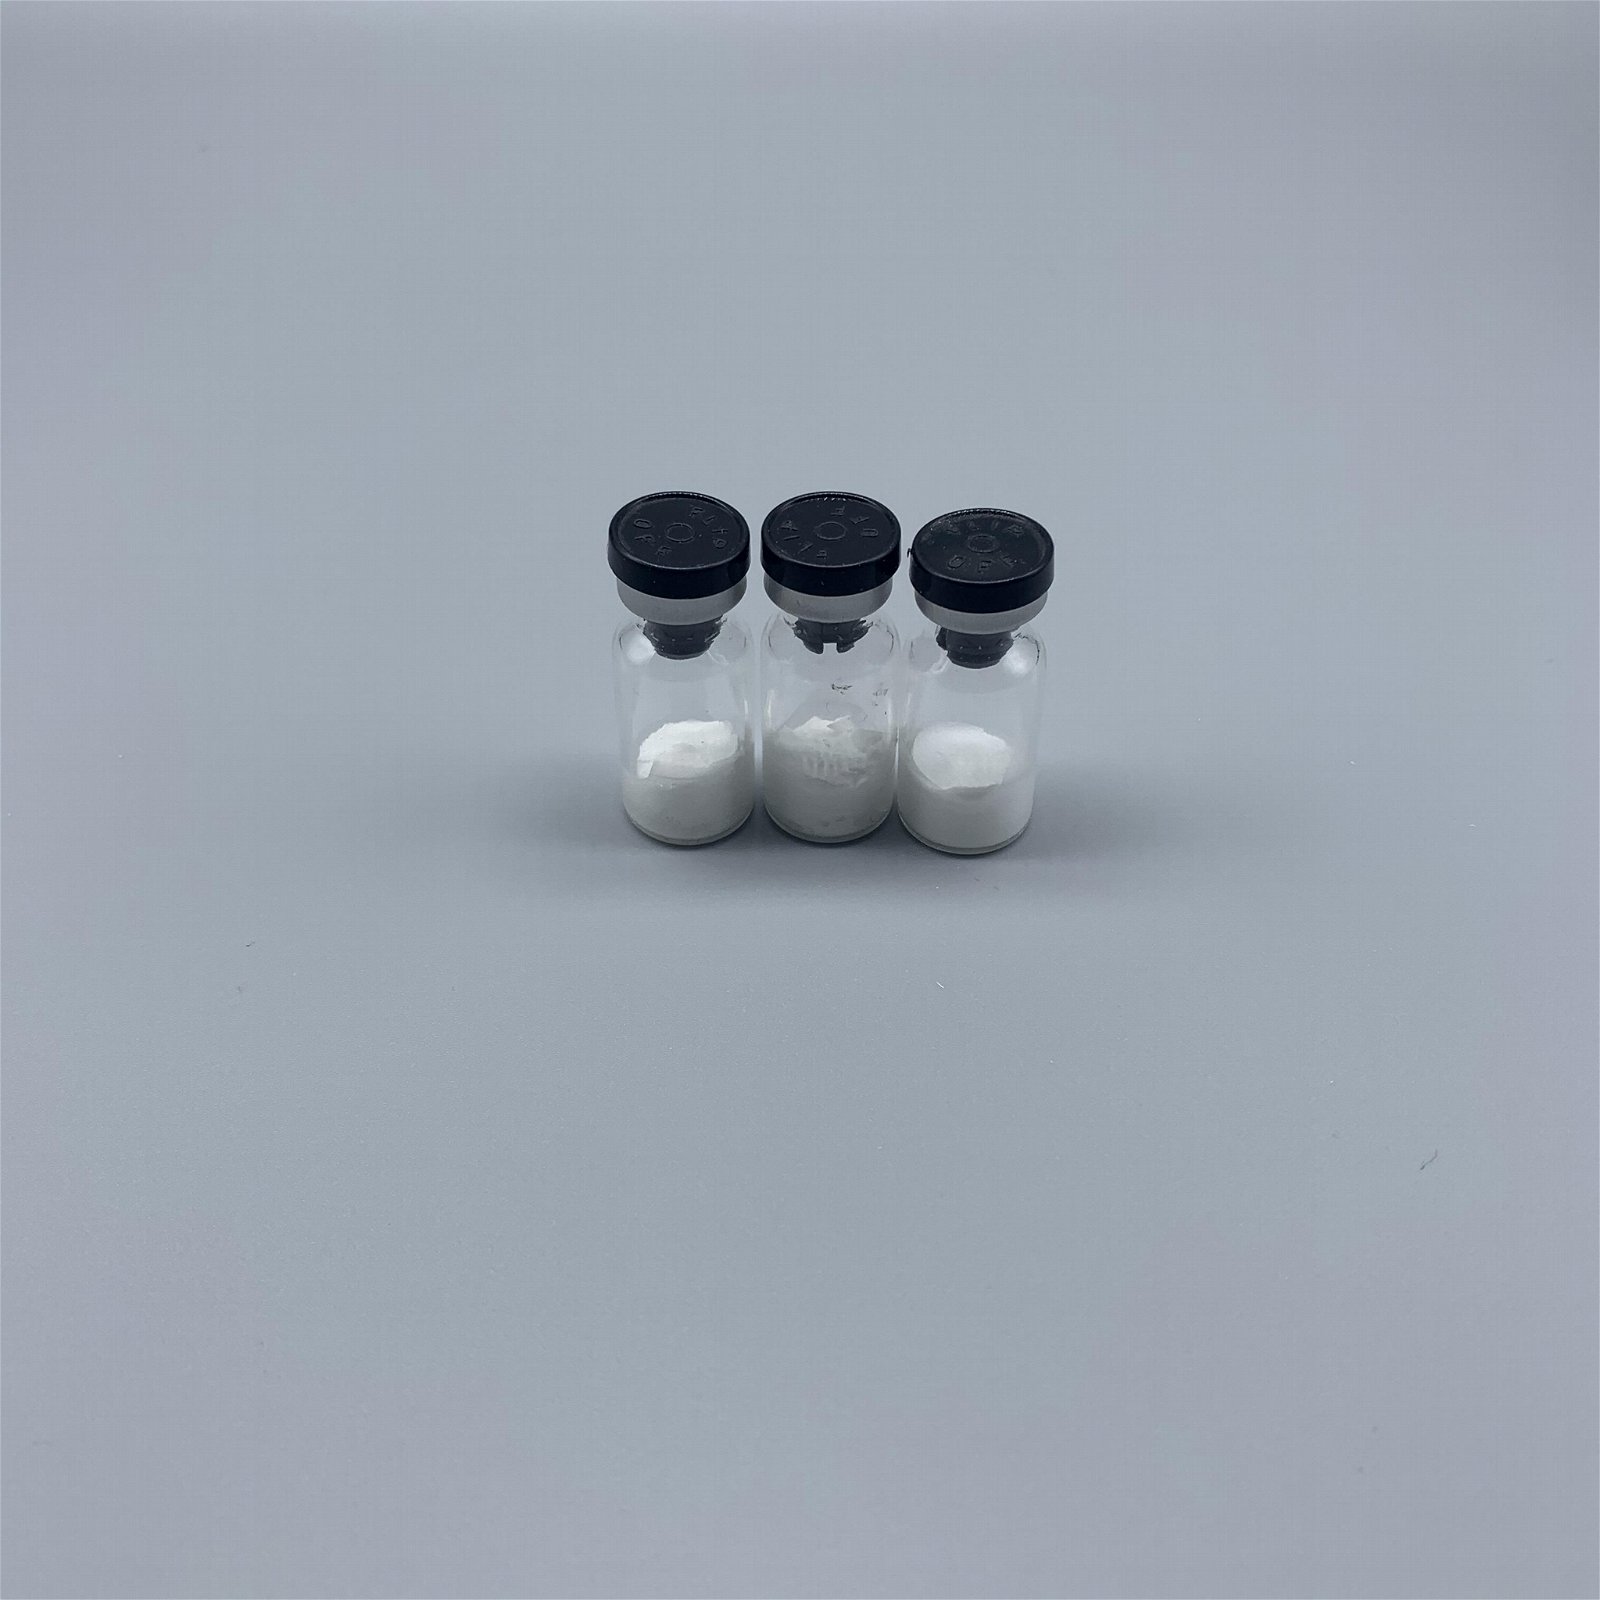 China Manufacturer99% Purity Bodybuilding Injection Peptides Lyophilized Dsip/Ds 2